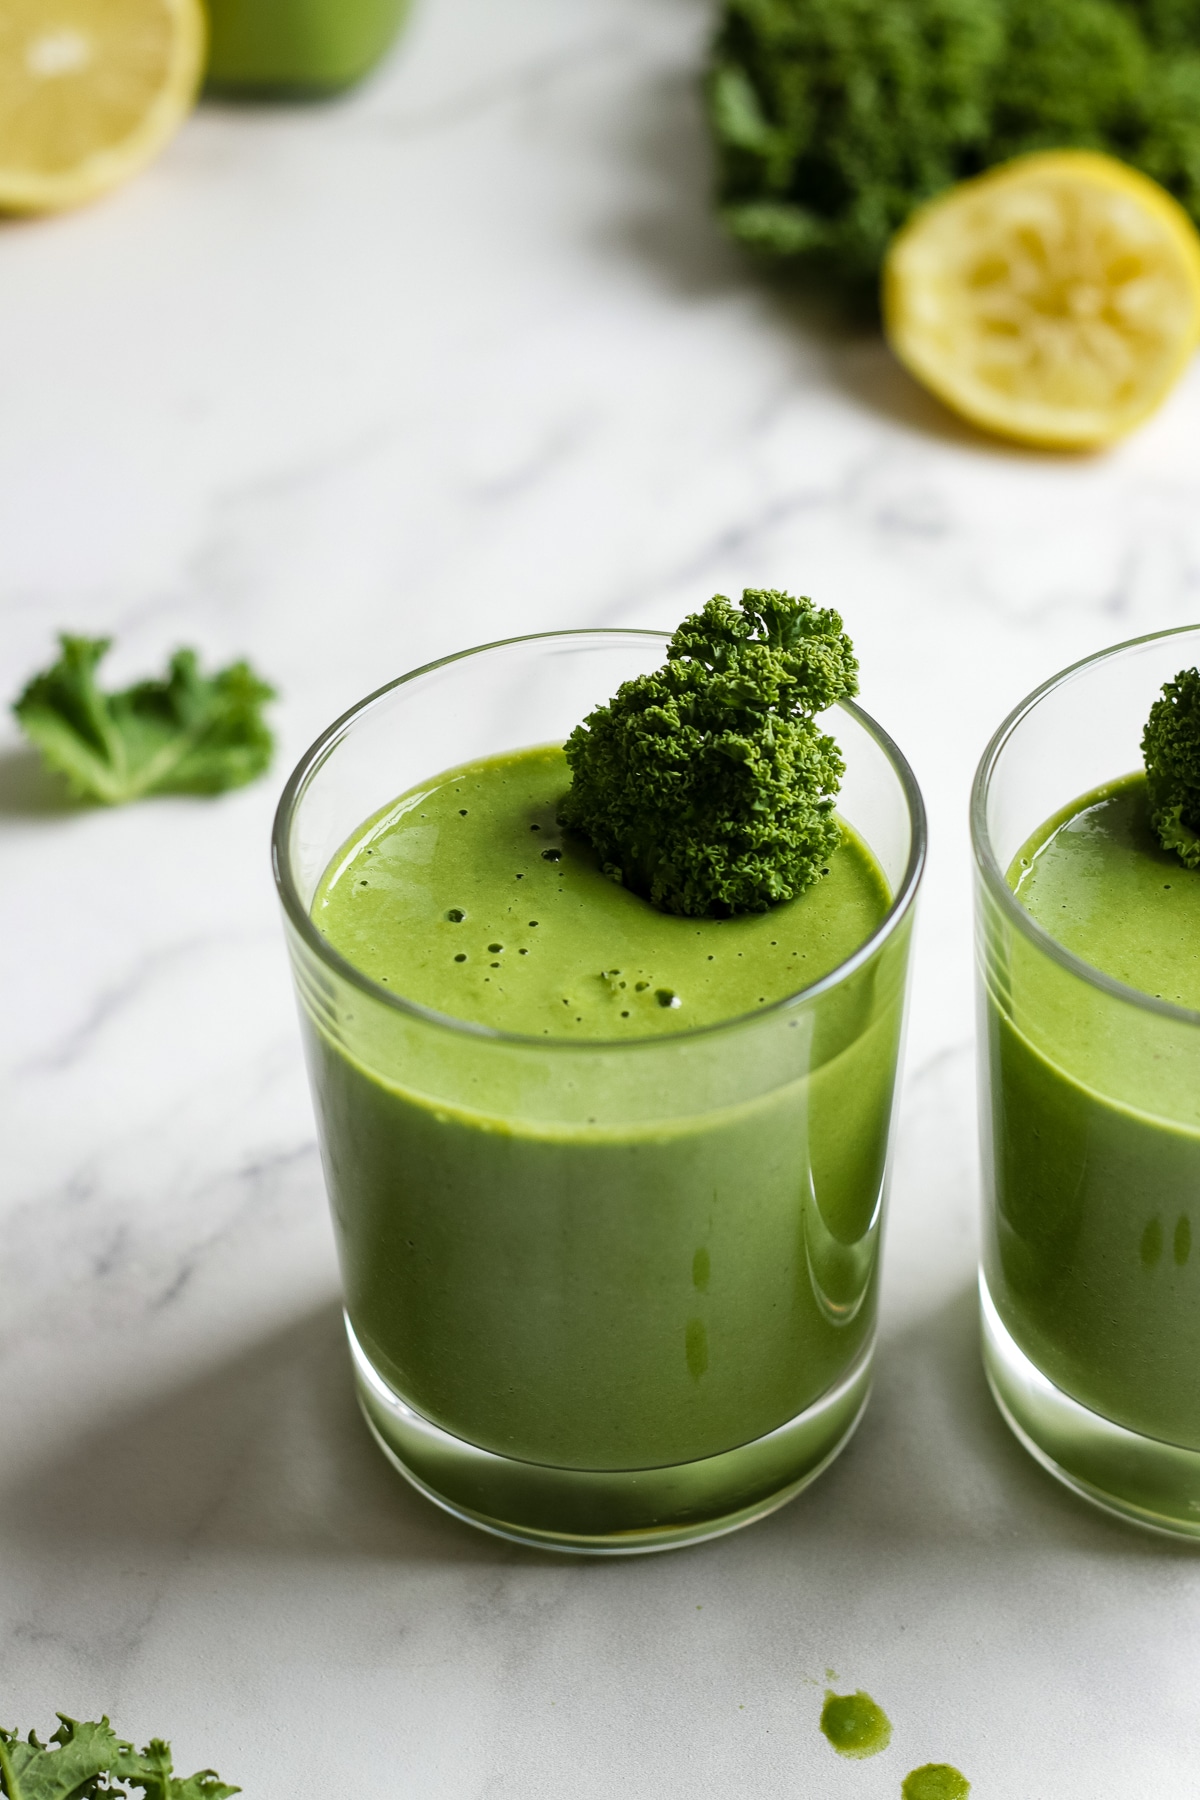 Kale Banana Smoothie Served in Glasses.